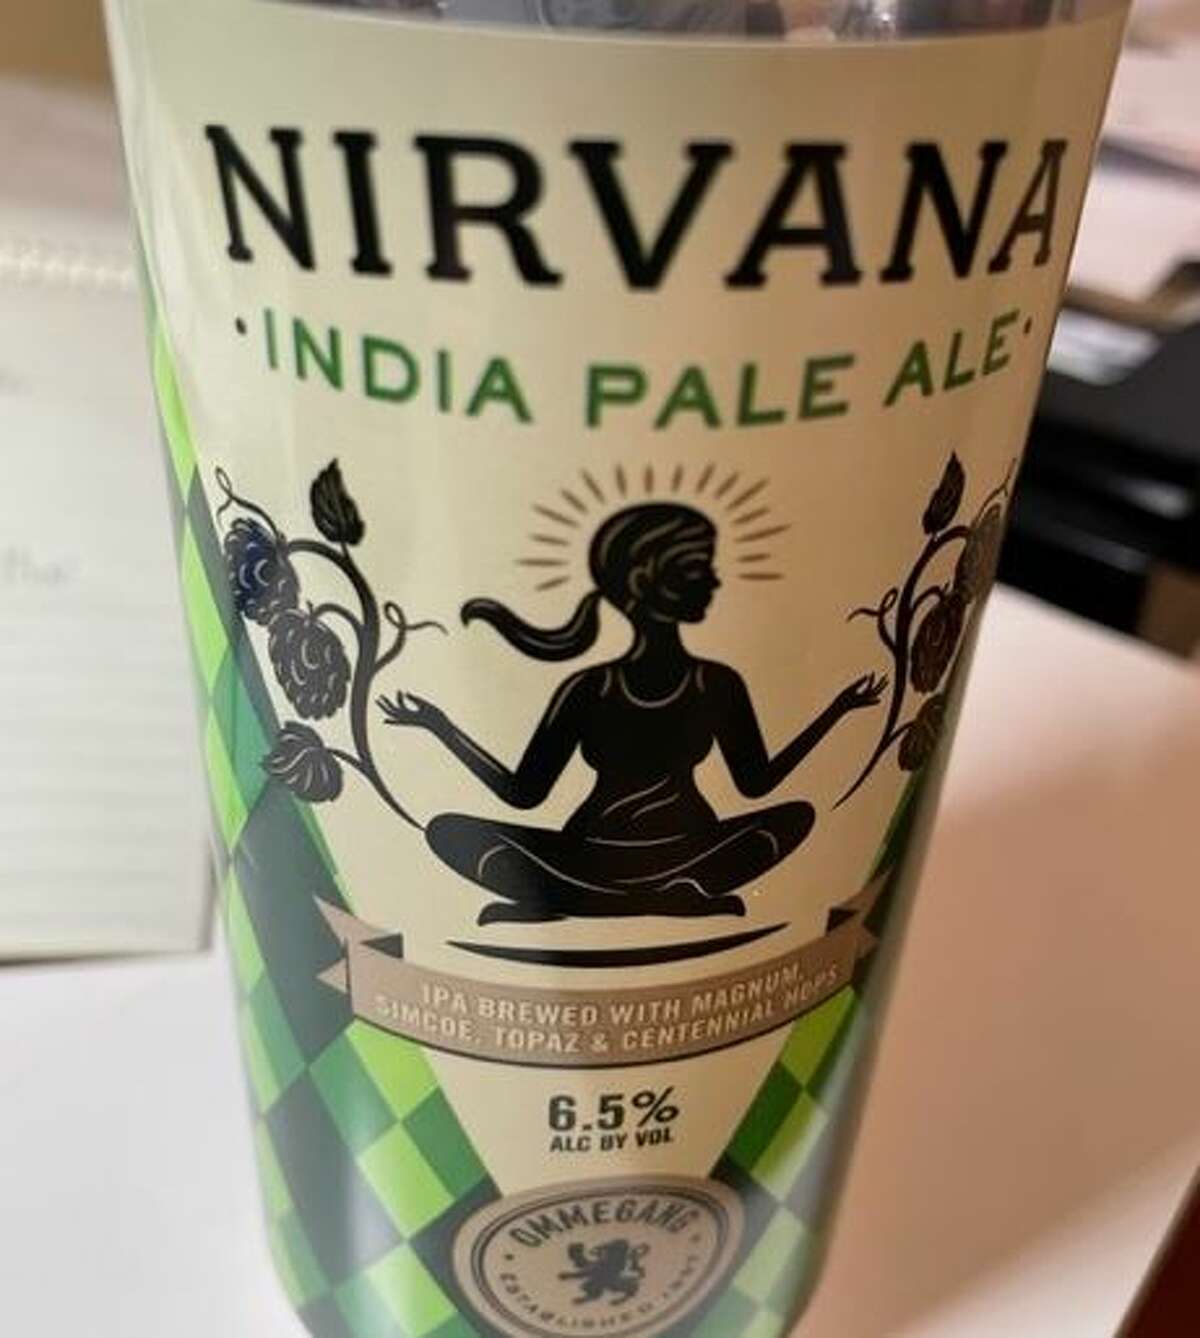 The name given to Ommegang brewery's Nirvana IPA beer has some Hindus and Buddhists upset or at least scratching their heads.